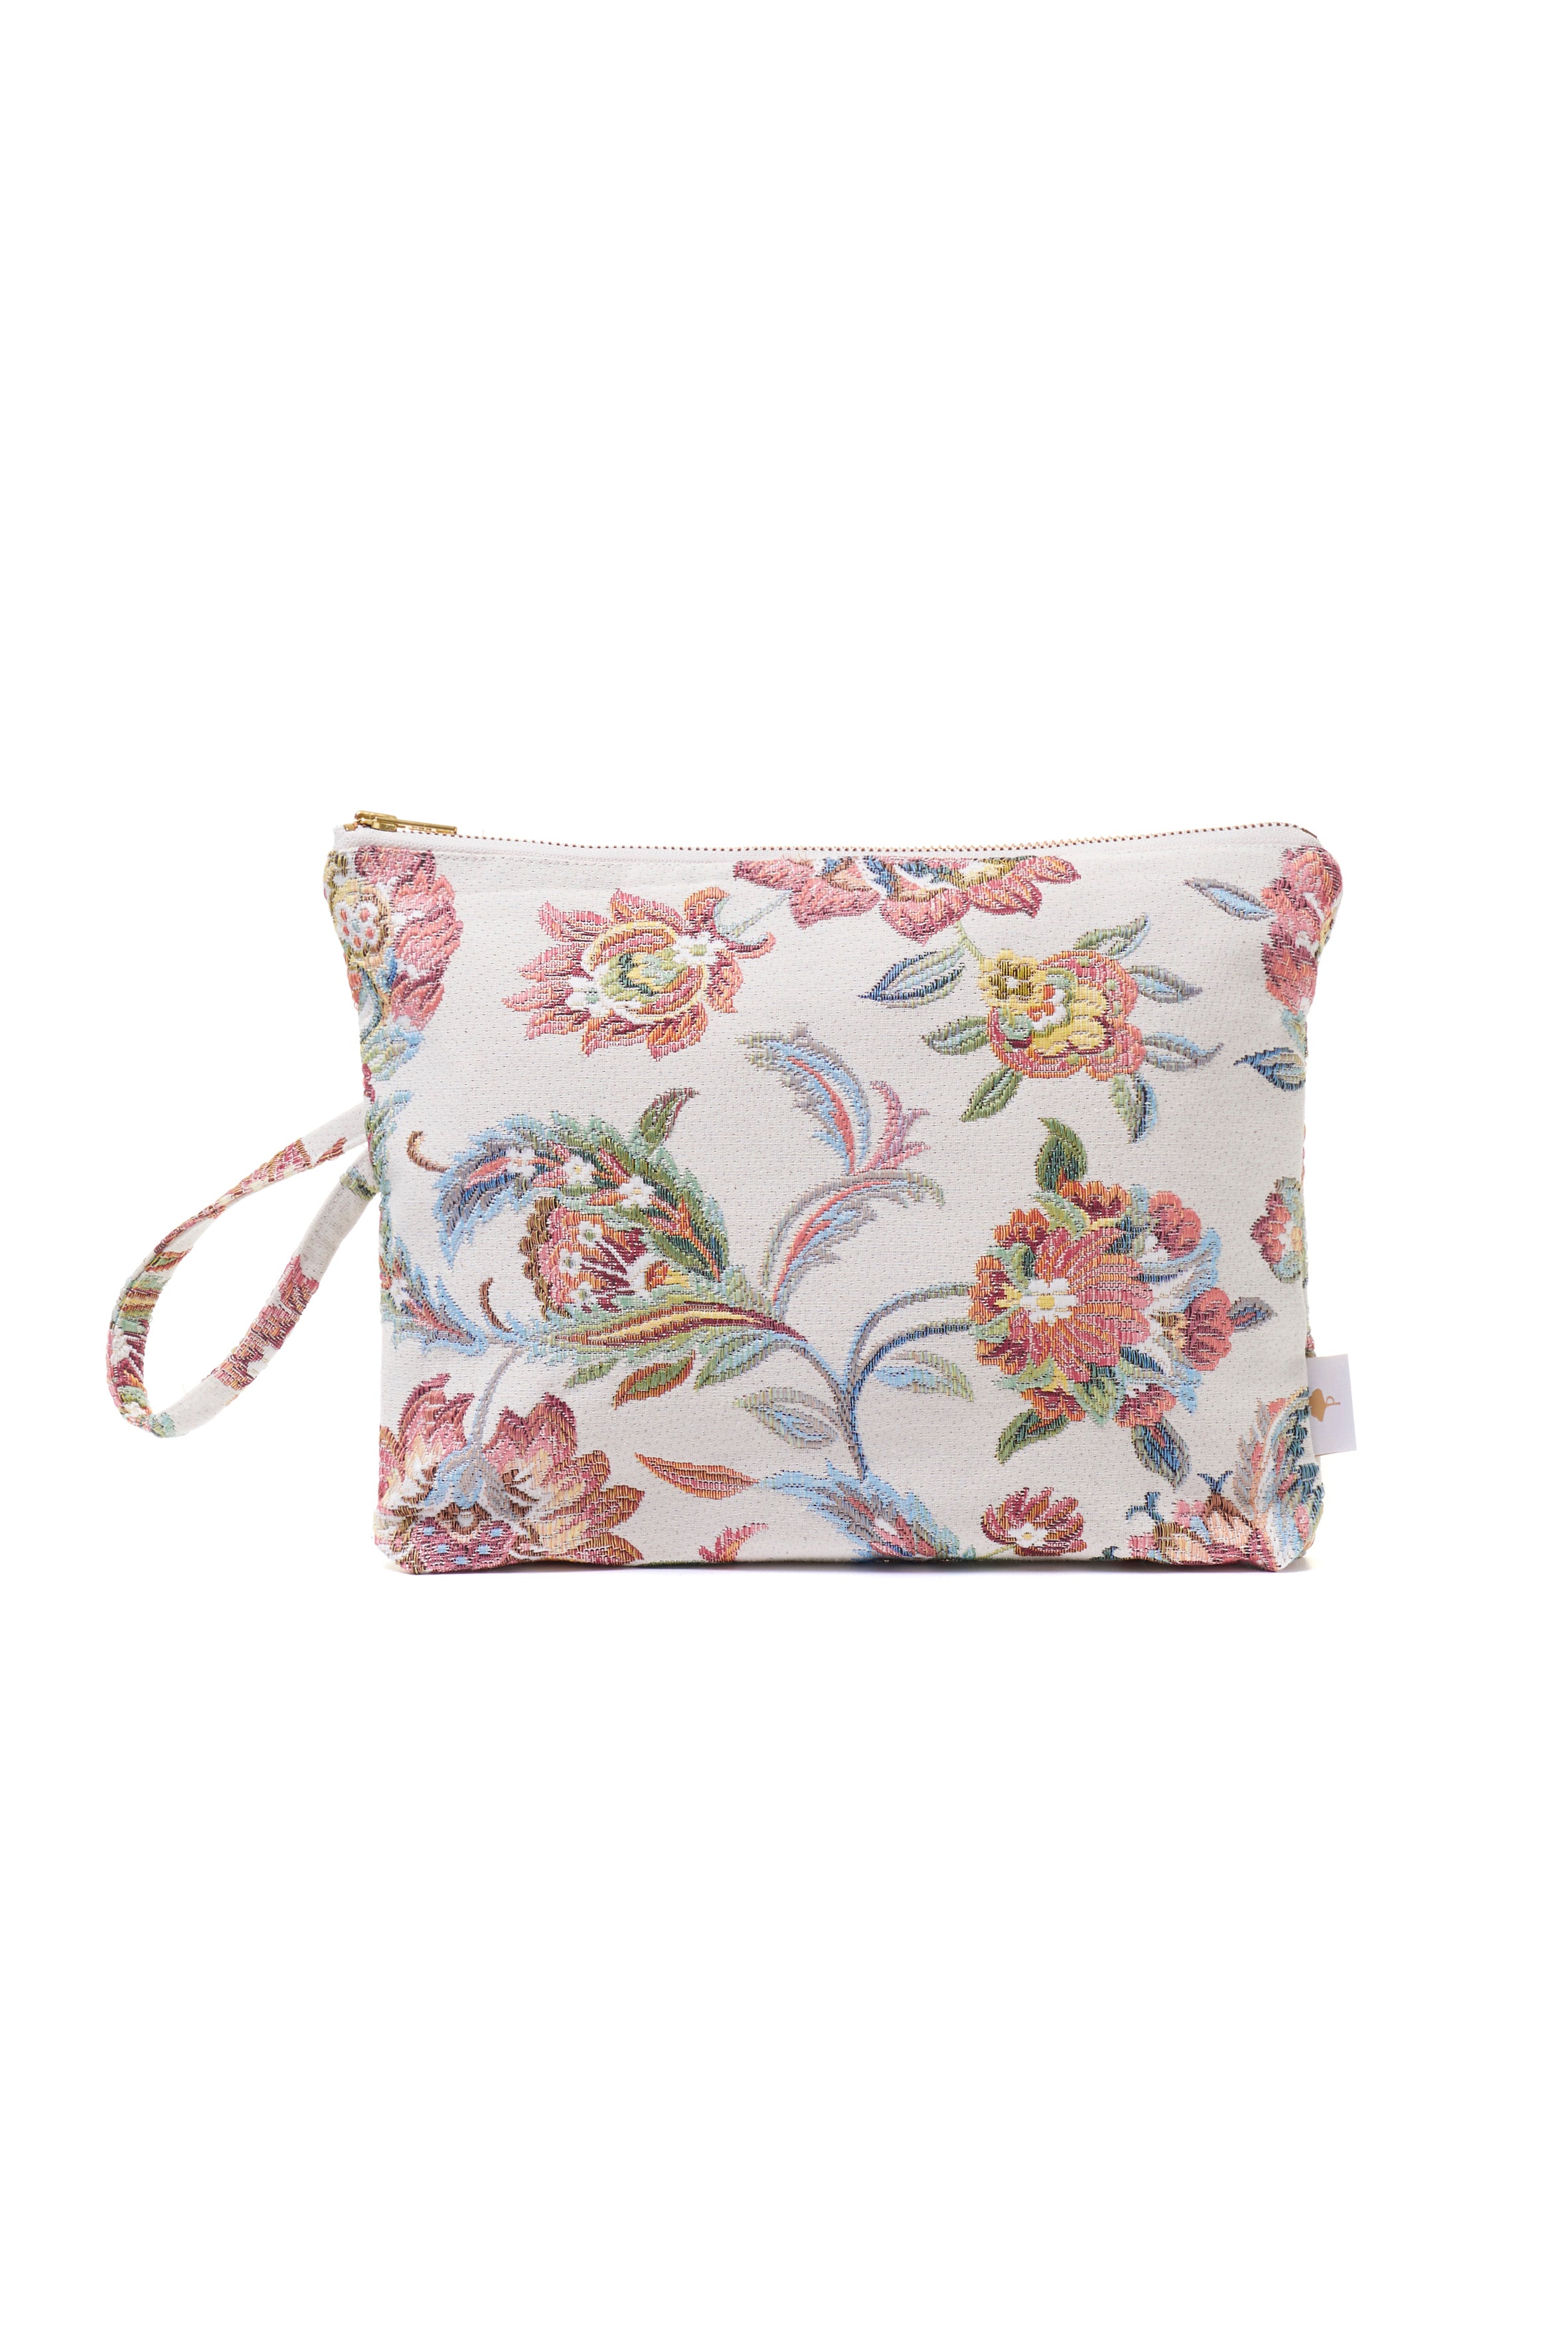 TRAVEL POUCH LARGE - ROSE